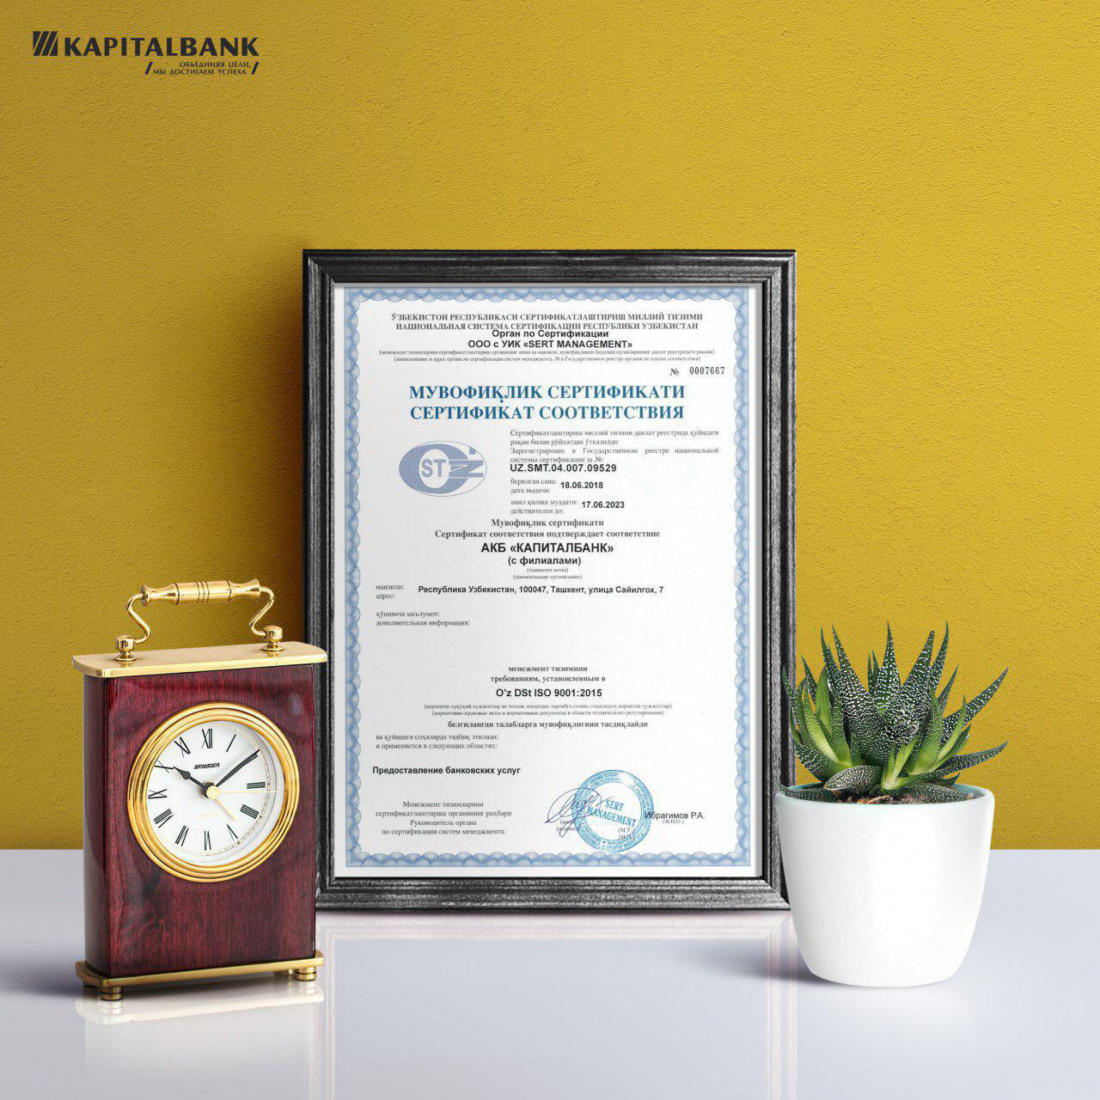 Joint Stock Commercial Bank "Kapitalbank" received the certificate of compliance with ISO 9001: 2015